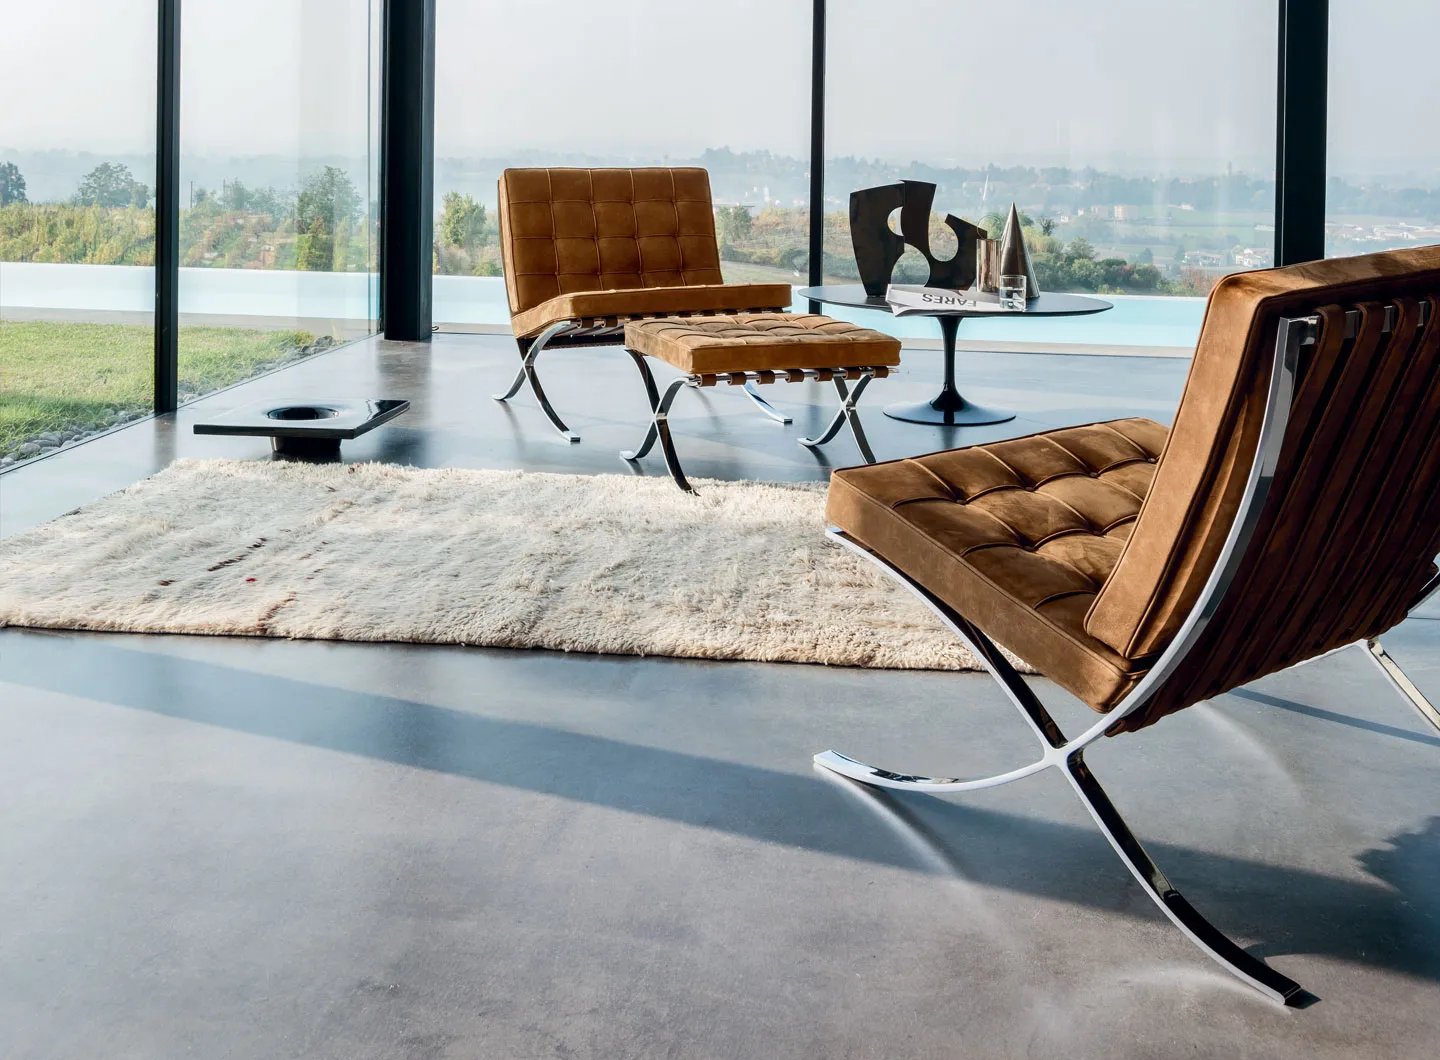 Barcelona® Collection designed by Ludwig Mies van der Rohe, Ph. Gionata Xerra